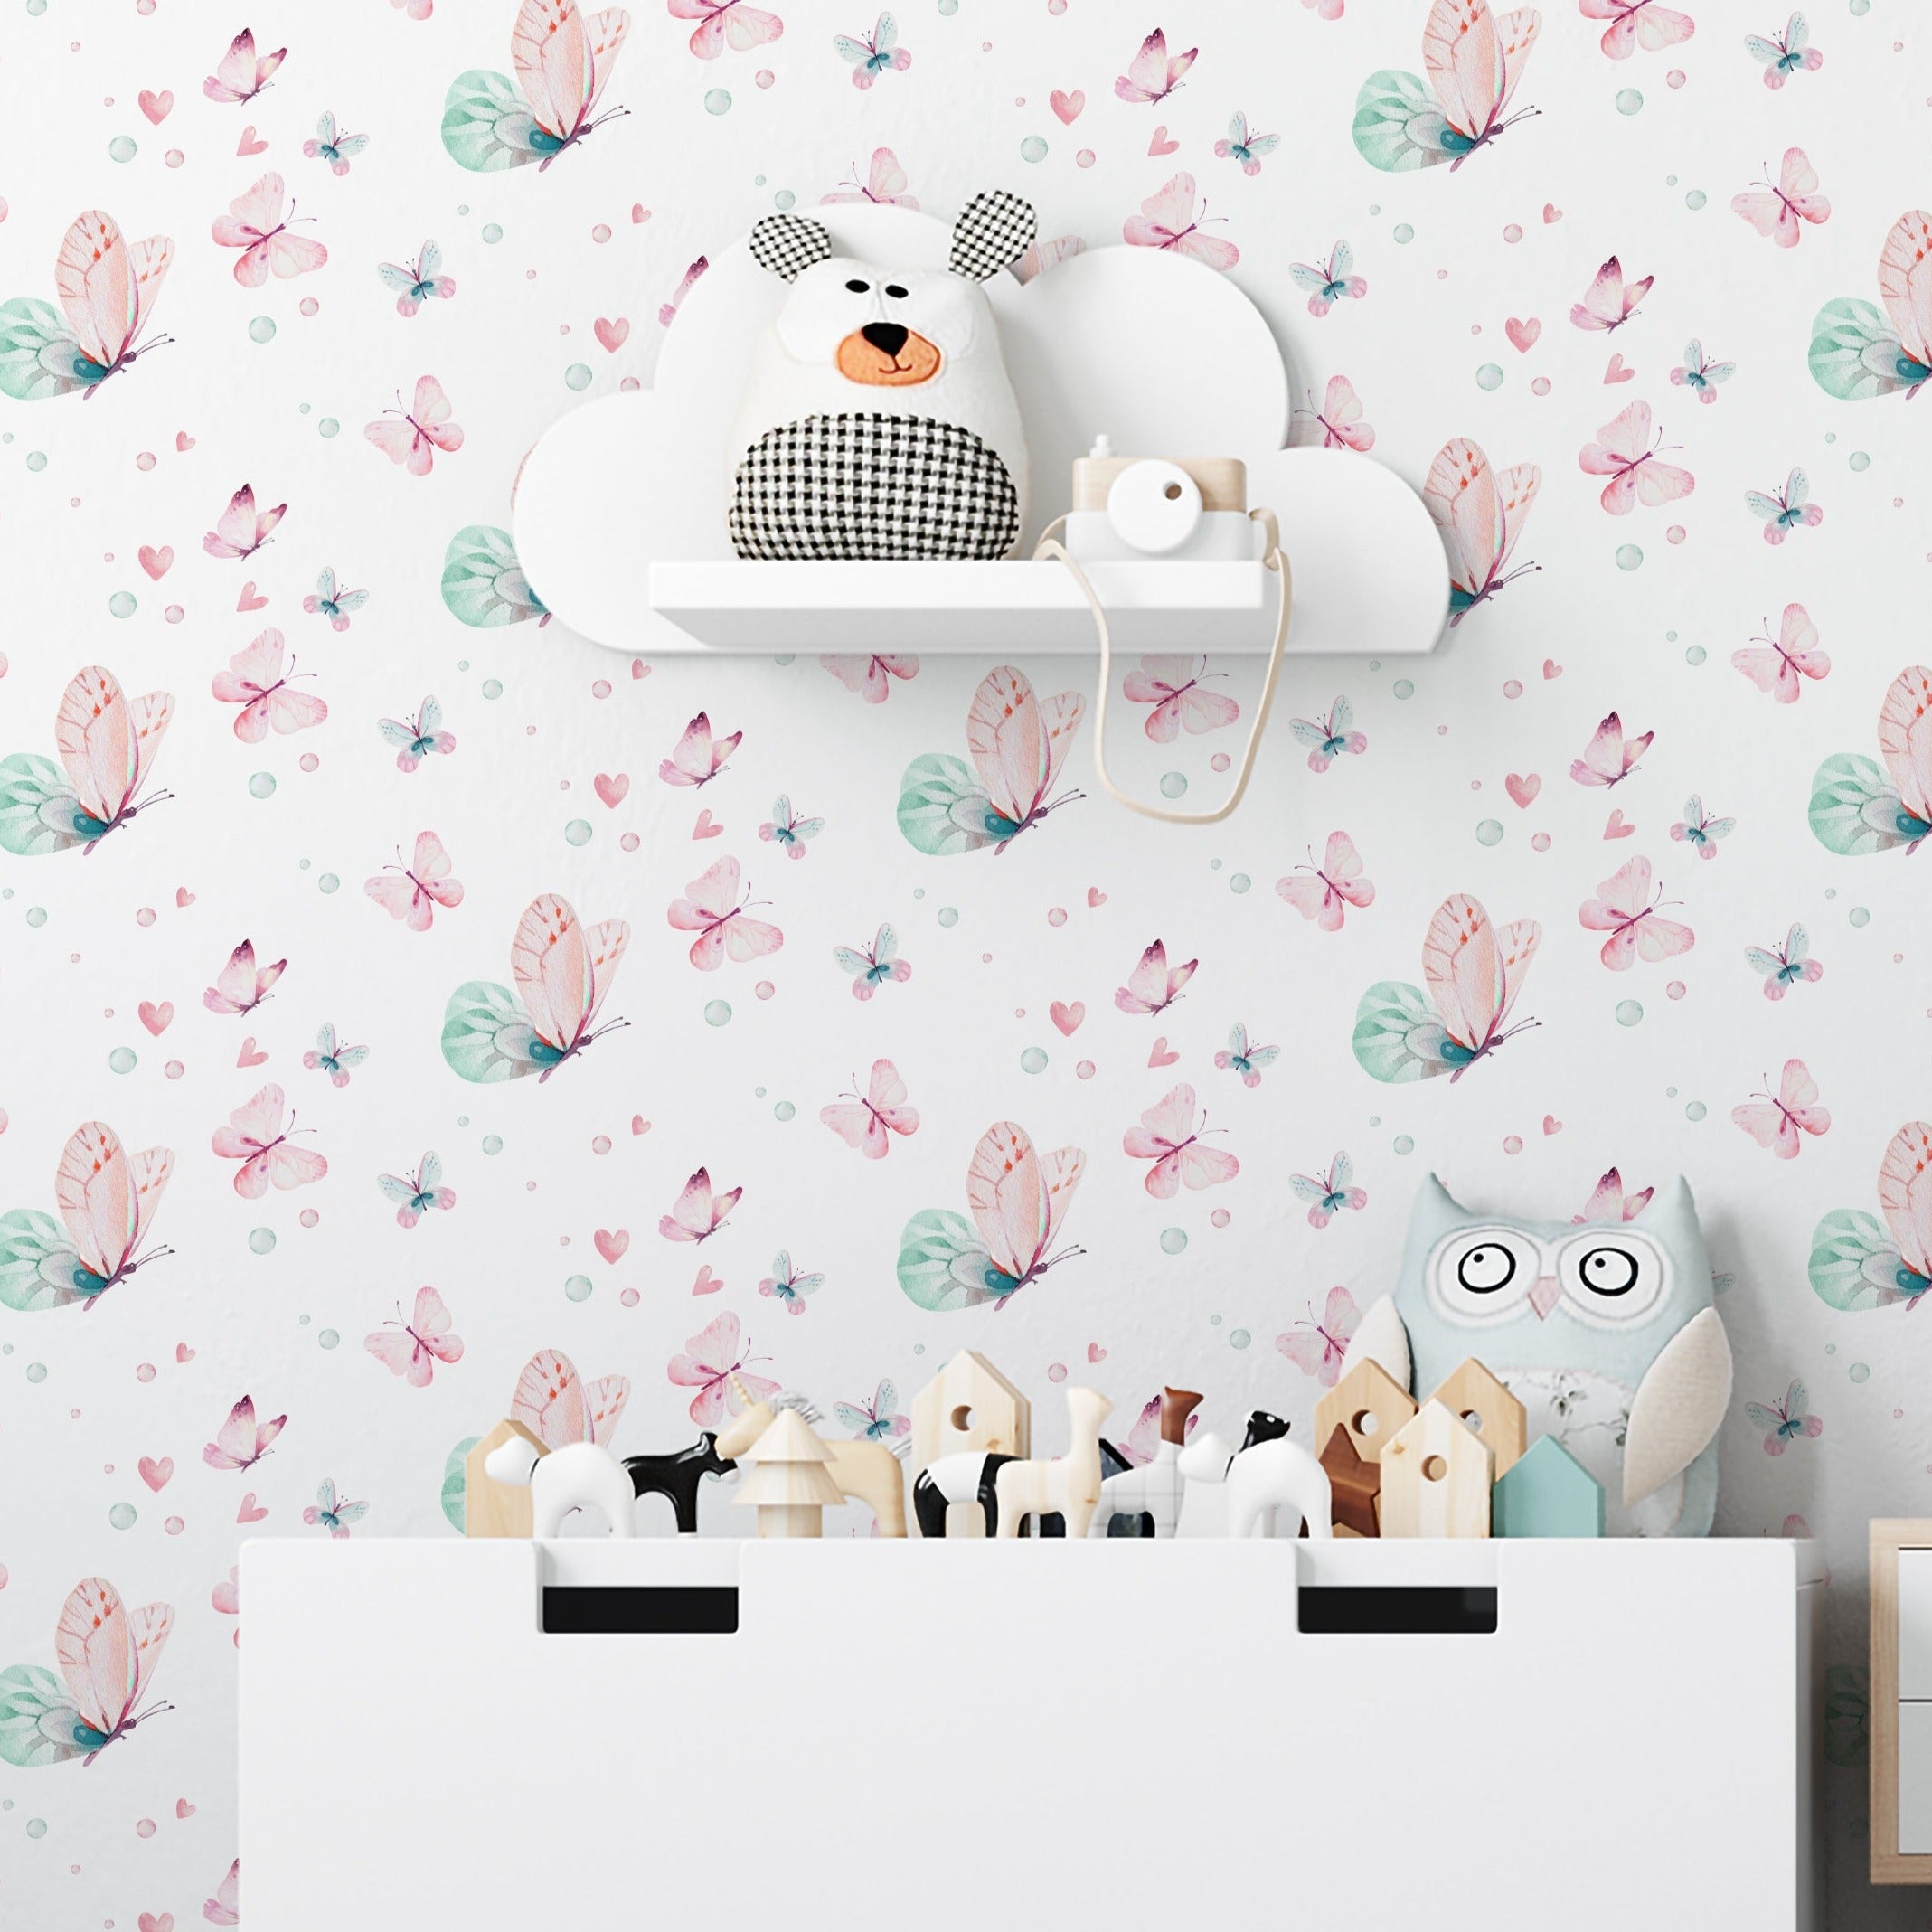 A modern nursery room showcasing the 'Fairy and Flowers III' wallpaper adorned with pink and teal butterflies and small floral accents. The room features contemporary white furniture and children’s toys, complementing the delicate and whimsical nature of the wallpaper.